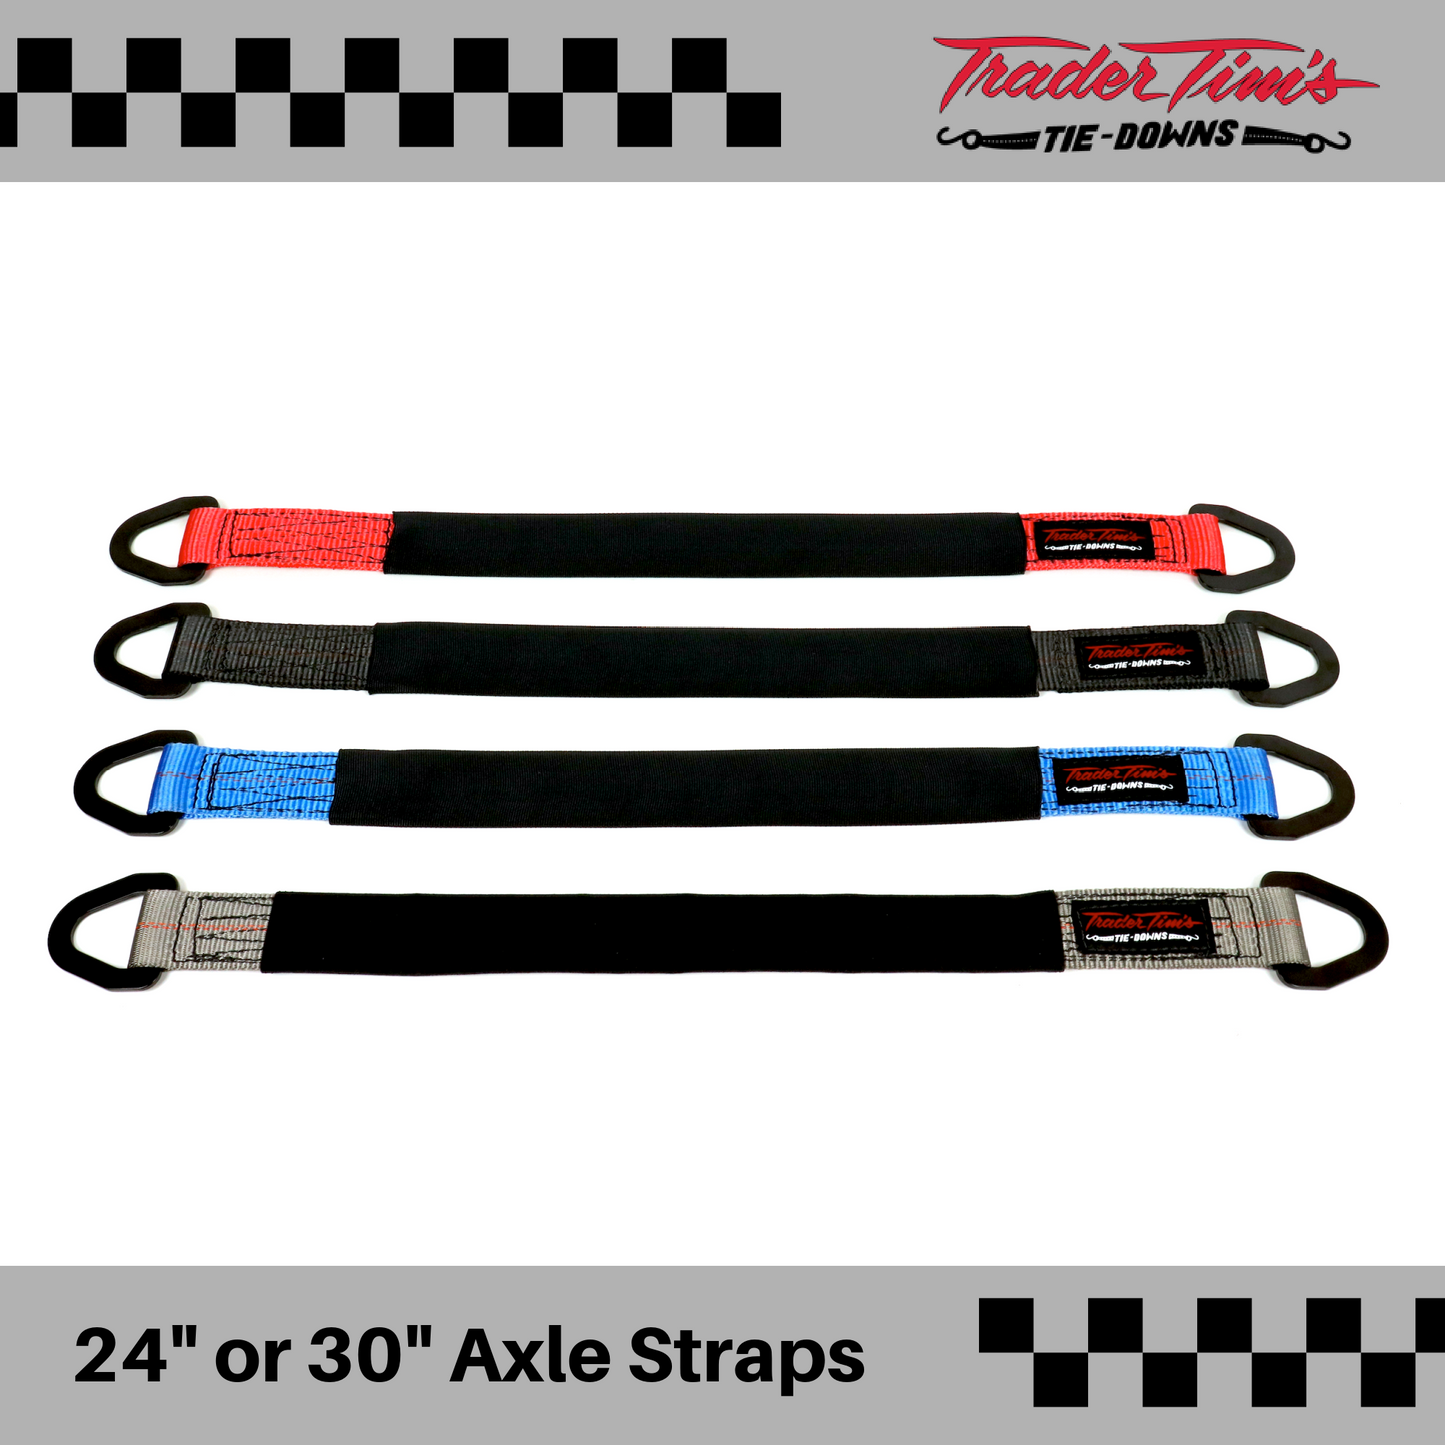 2” Axle Straps with Sleeve - 4 Colors Available